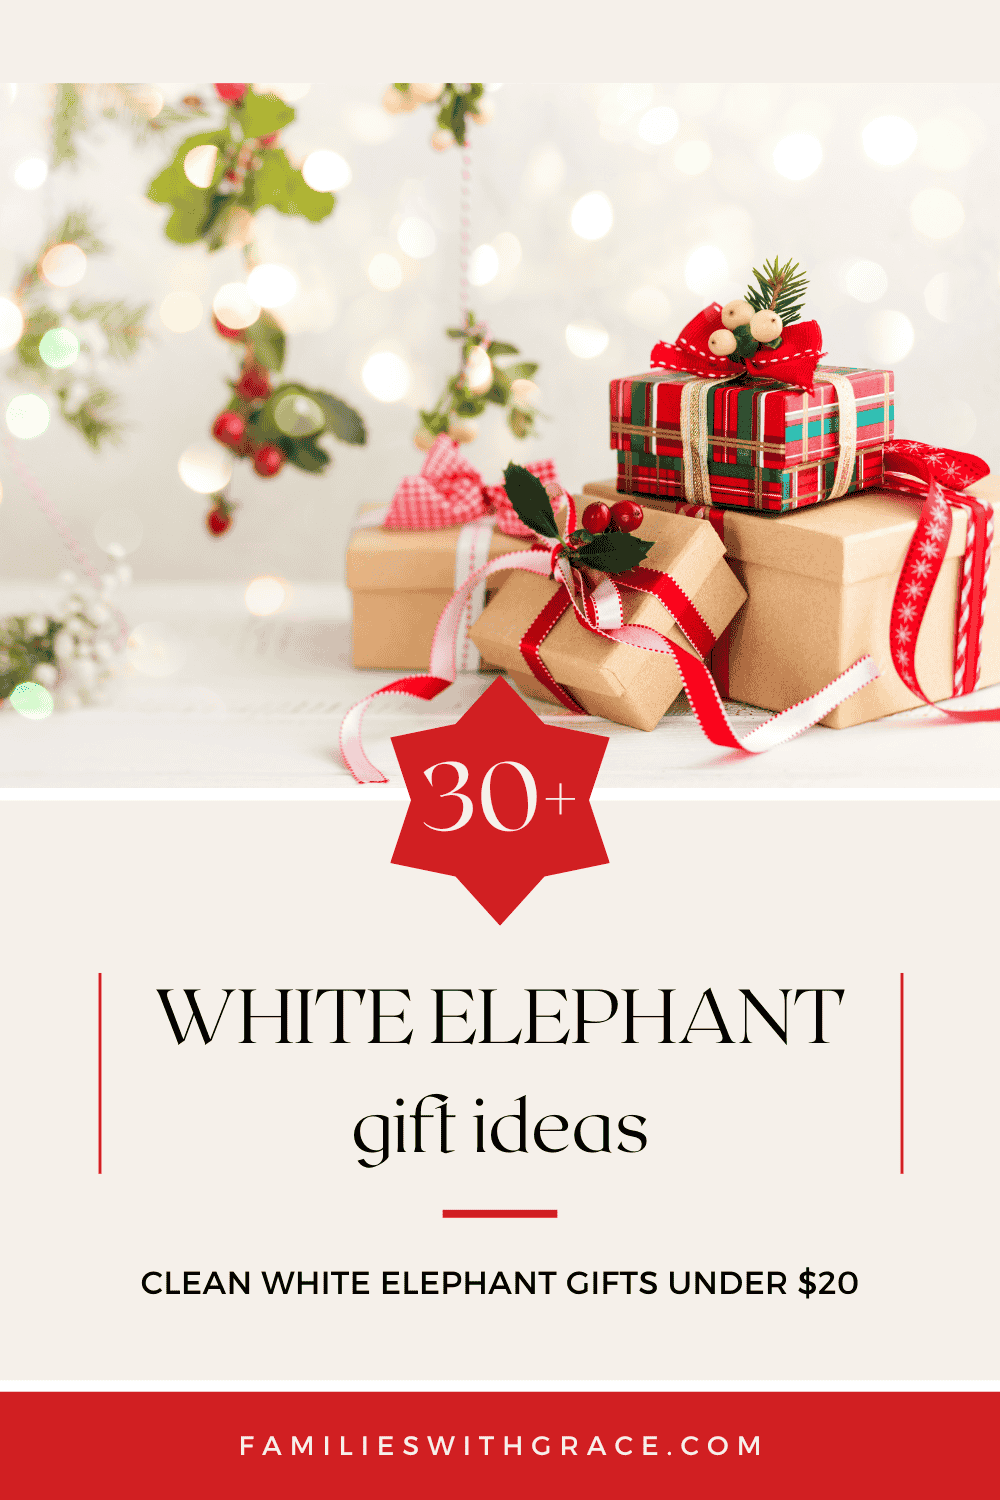 https://familieswithgrace.com/wp-content/uploads/2022/11/White-elephant-gift-ideas-PIN4.png